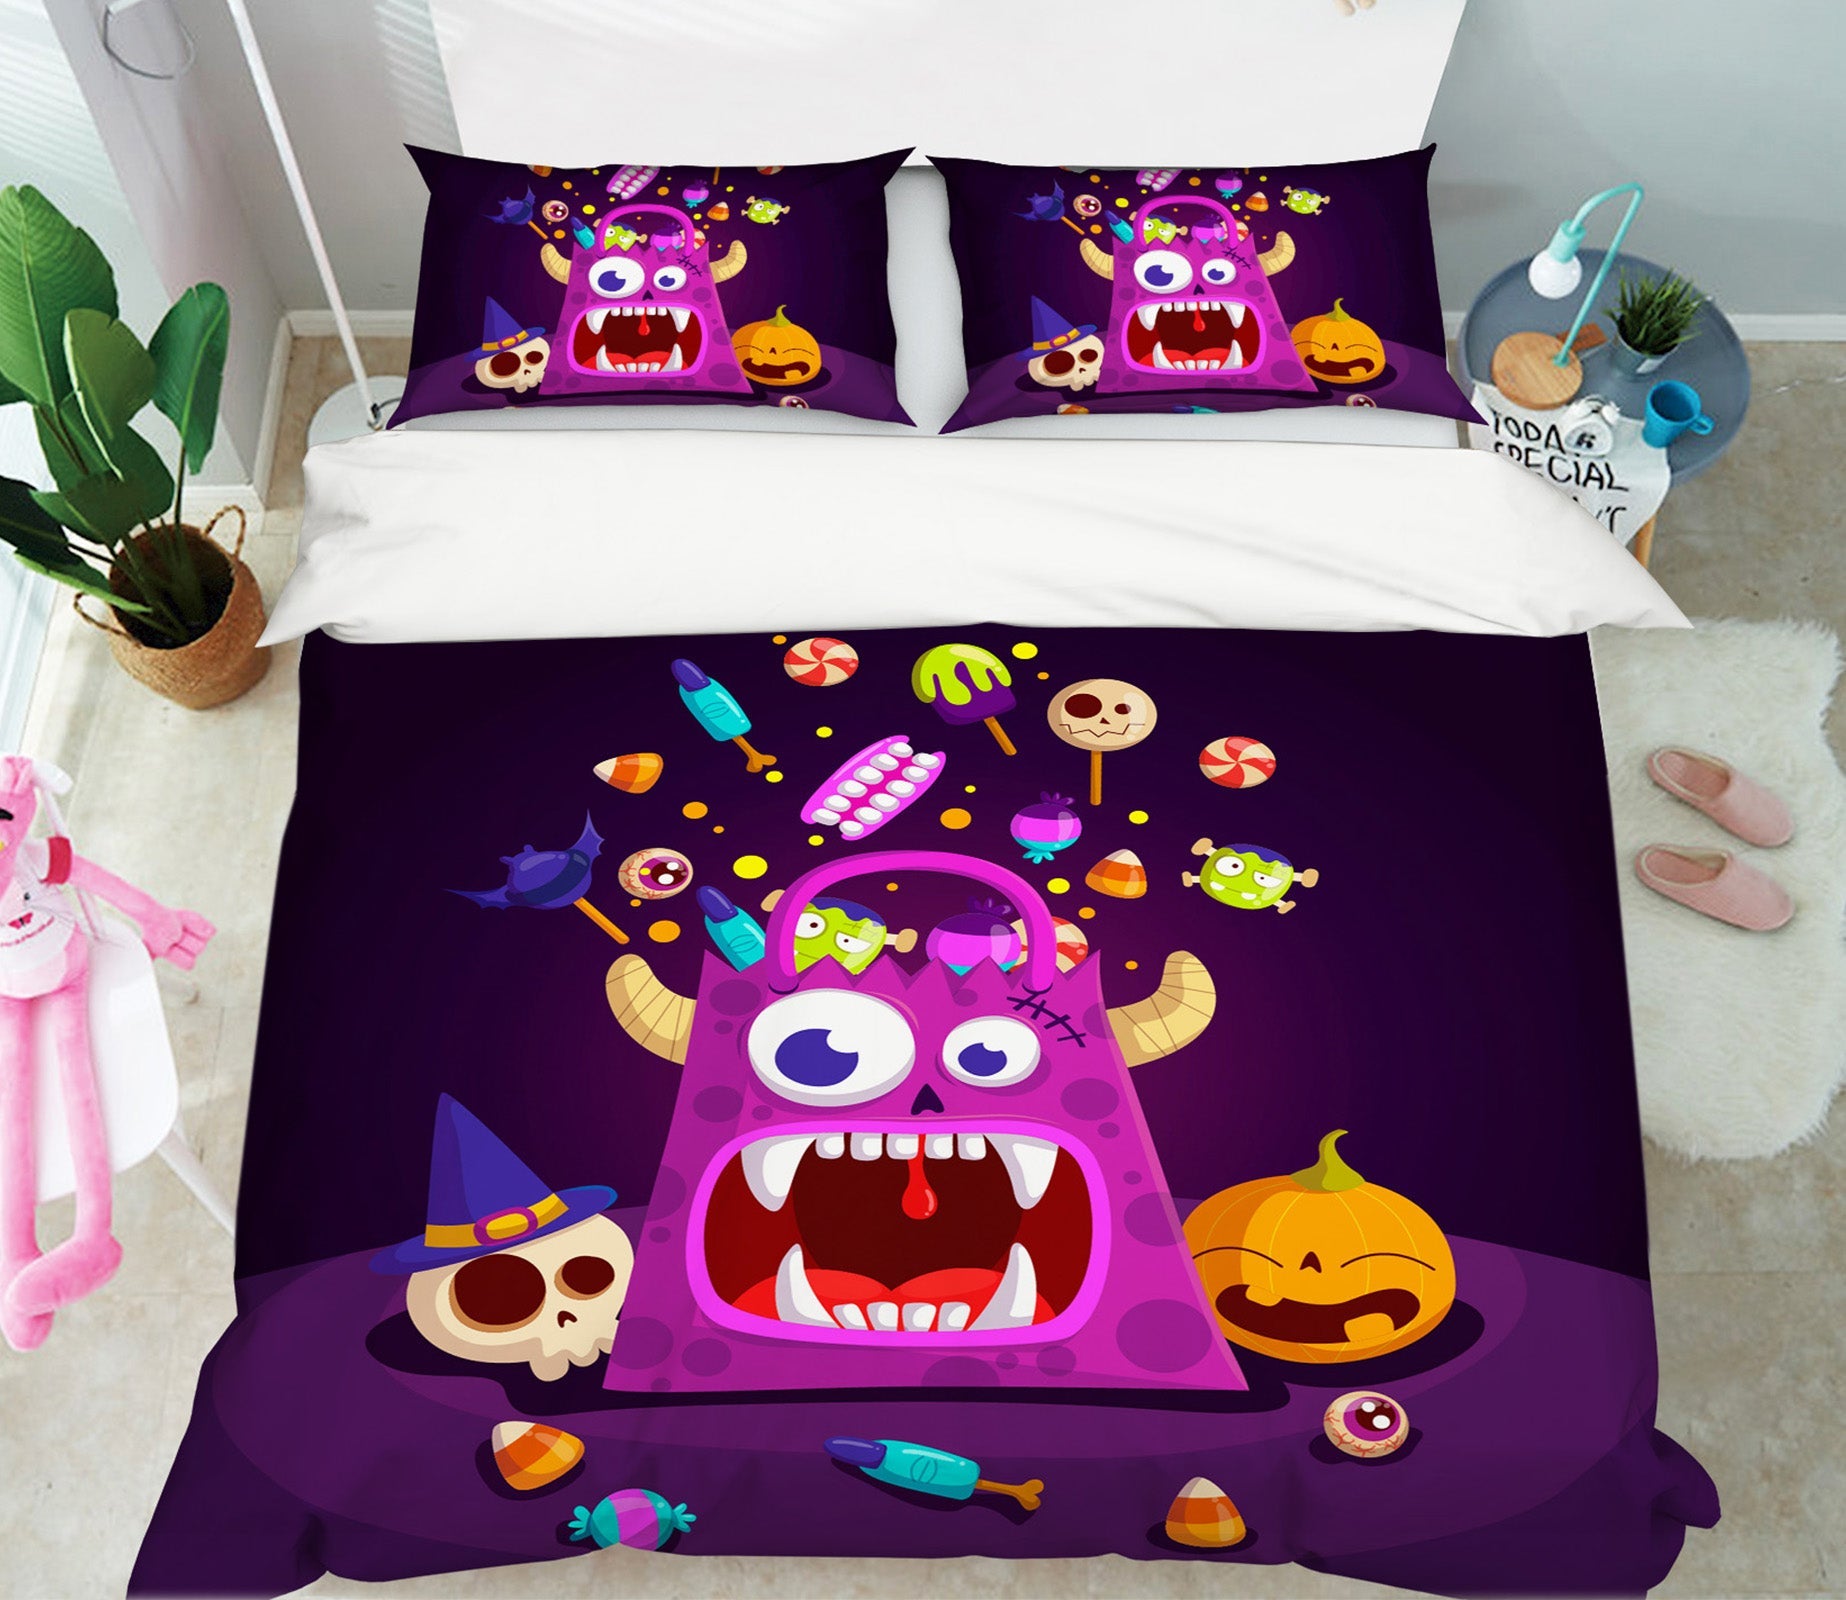 3D Monster Shopping Bag 1200 Halloween Bed Pillowcases Quilt Quiet Covers AJ Creativity Home 